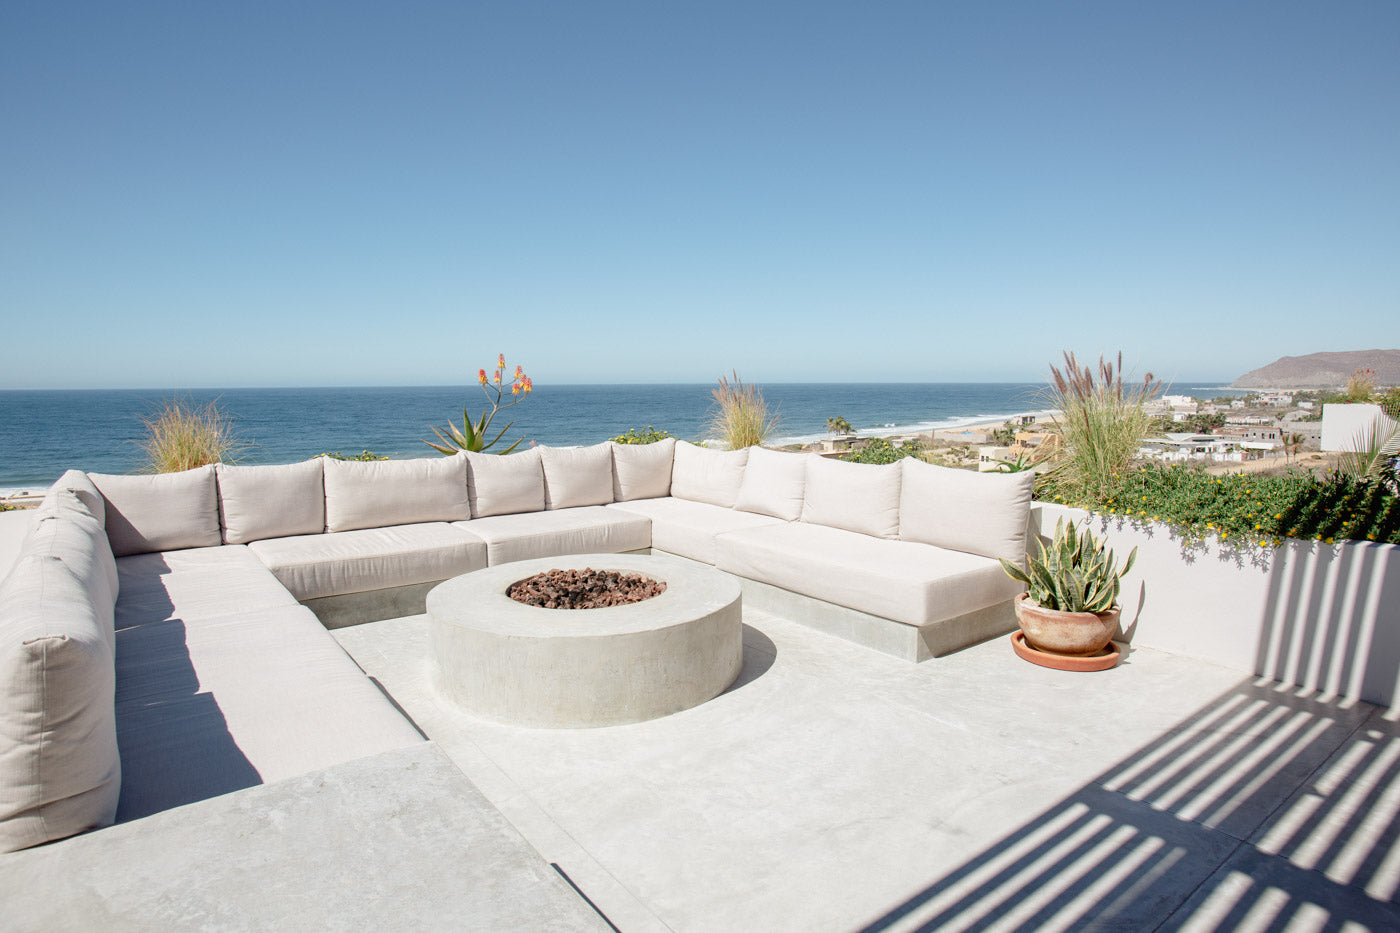 Image of communal gathering space overlooking the ocean for the soulside spring renewal and recovery yoga retreat in baja california mexico near todos santos - a retreat for recovery, rest, rejuvenation, yoga and self-care.